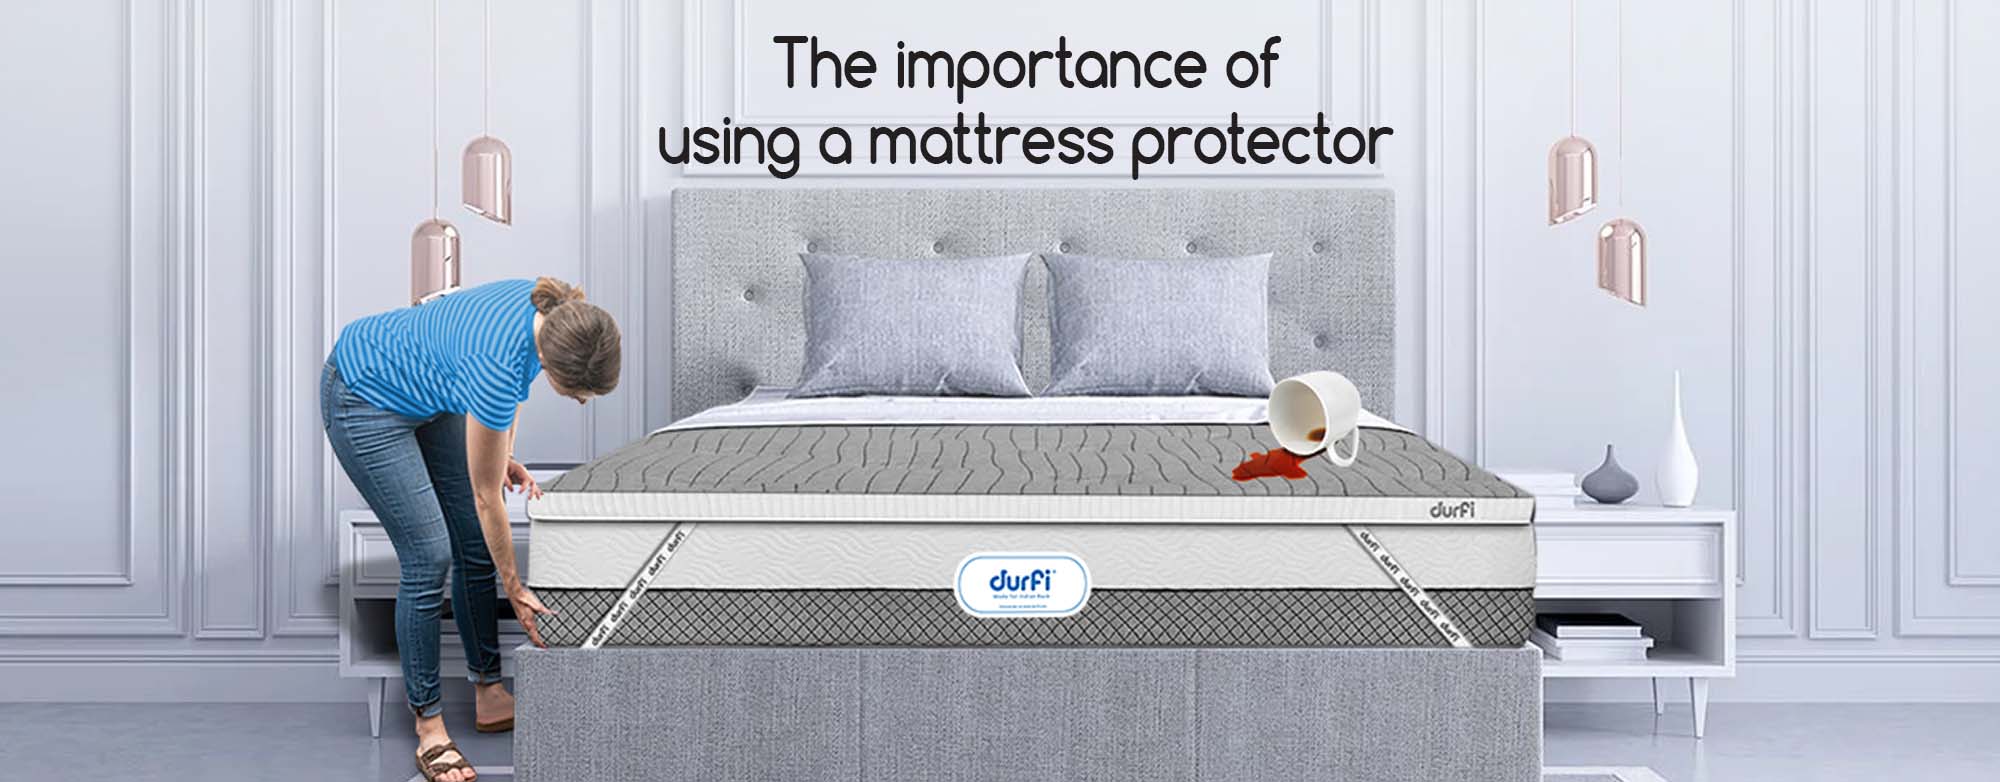 is it important to have a mattress protector